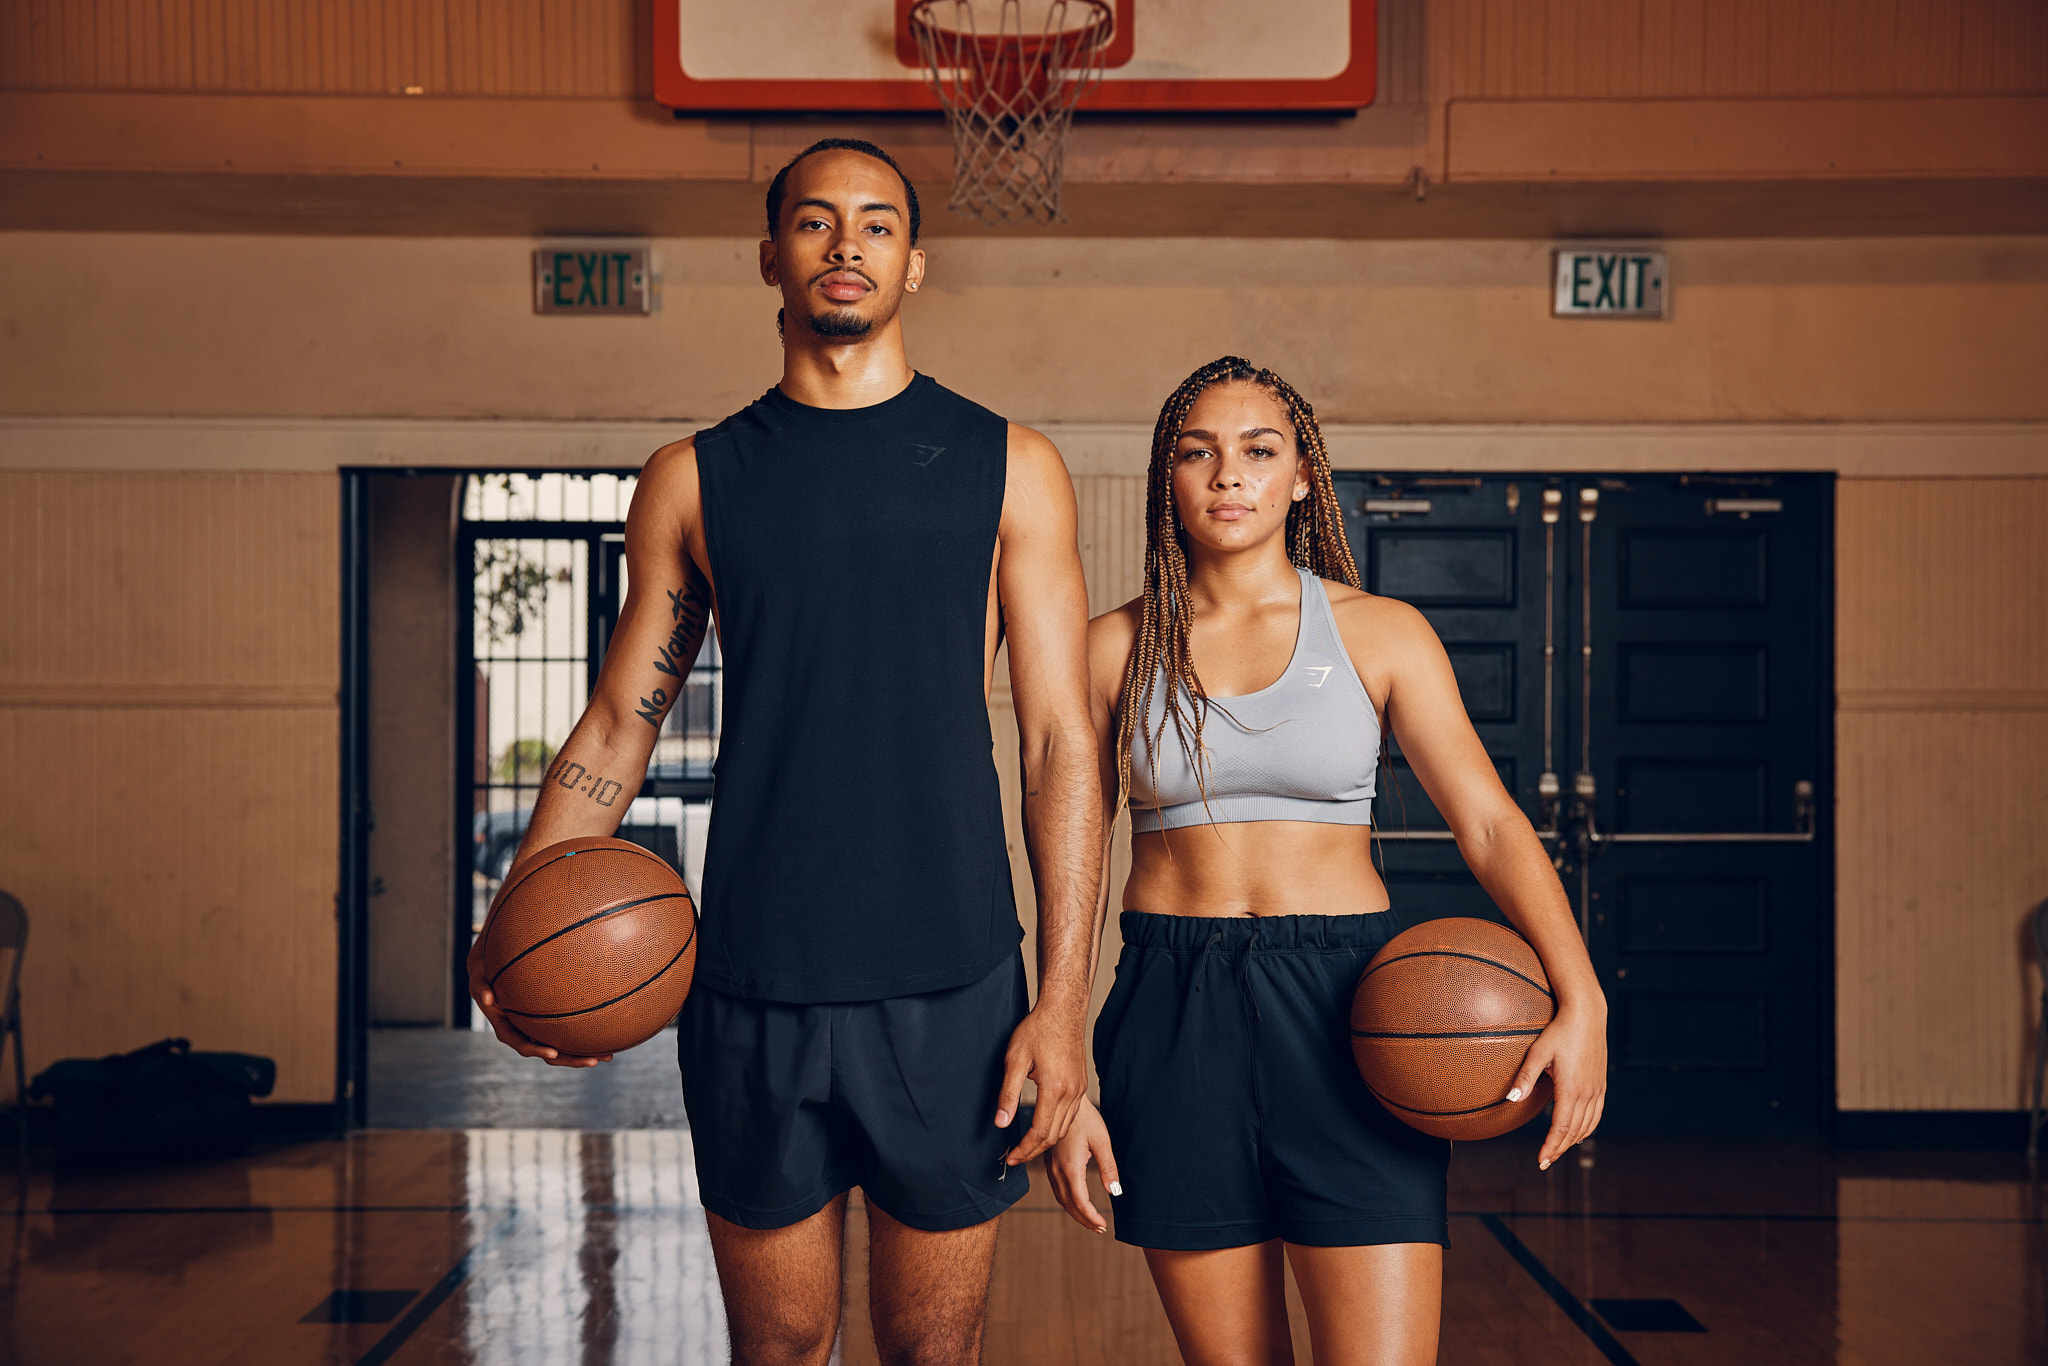 Ancell Digital Art OR. Los Angeles Commercial GYMSHARK basketball